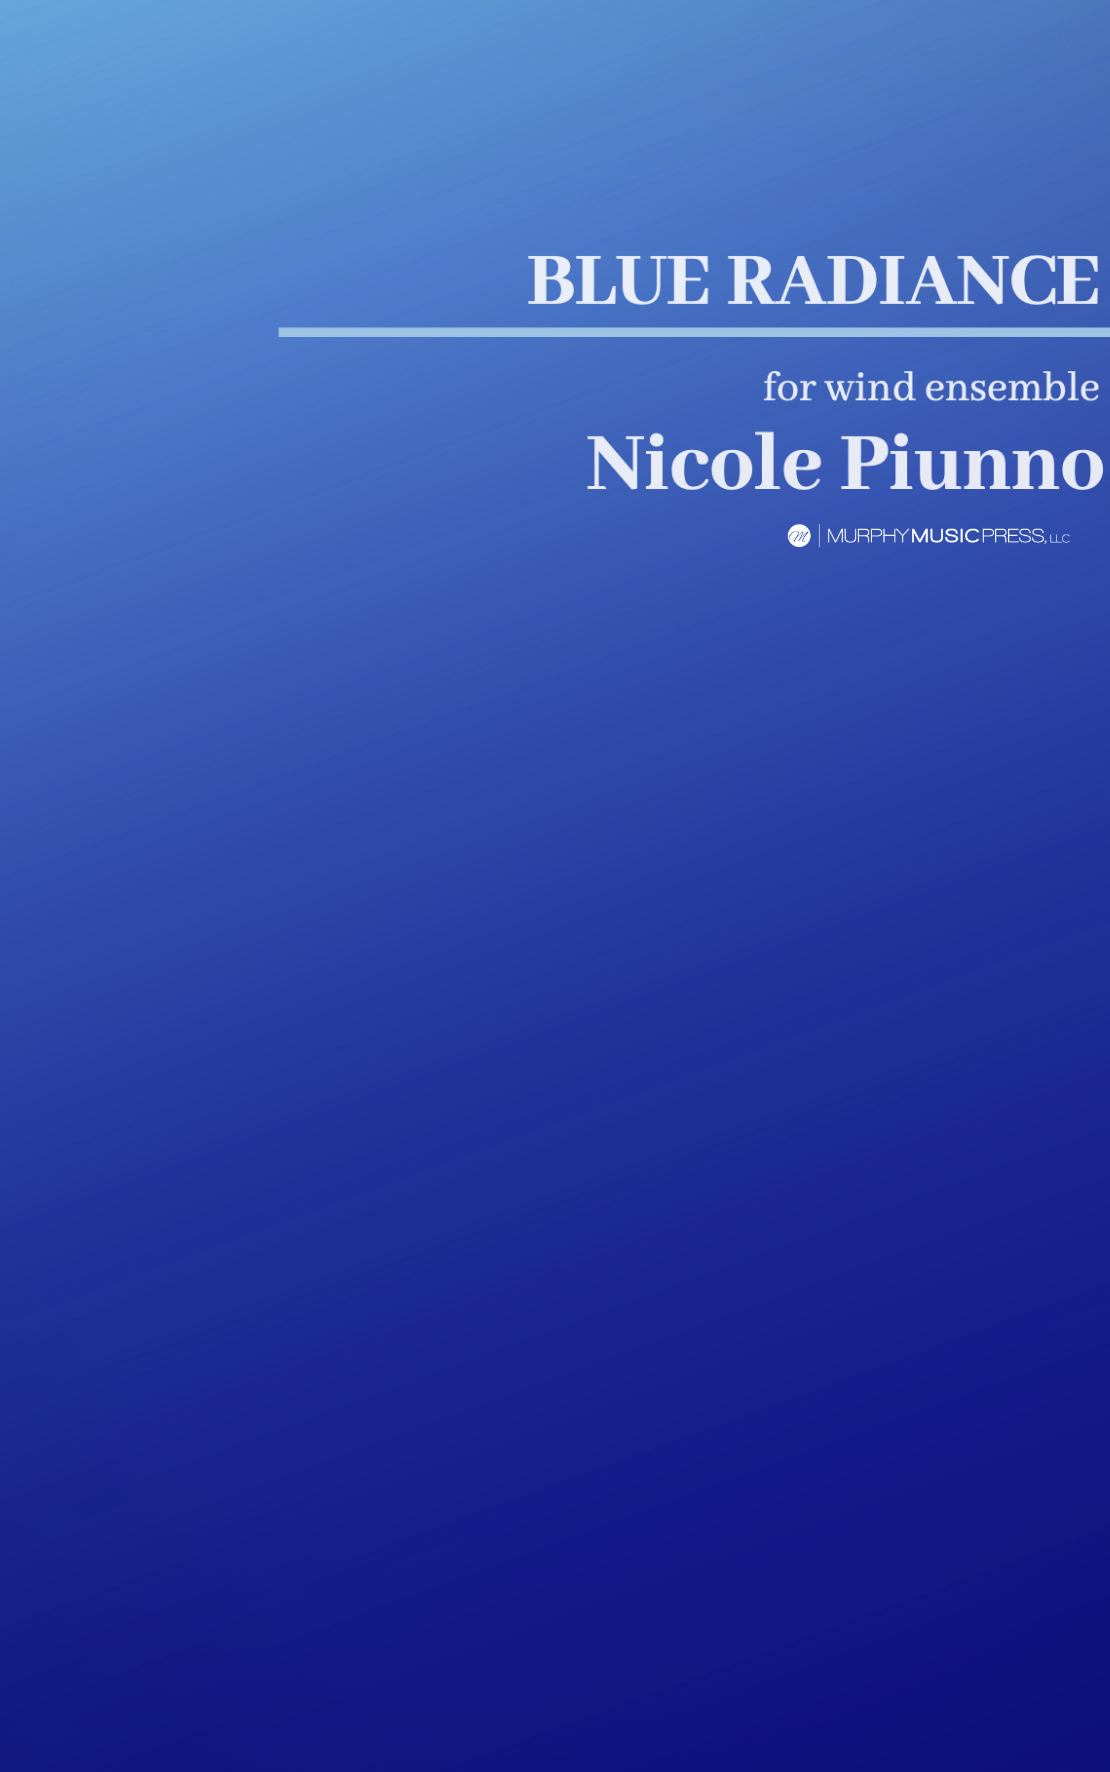 Blue Radiance (Score Only) by Nicole Piunno